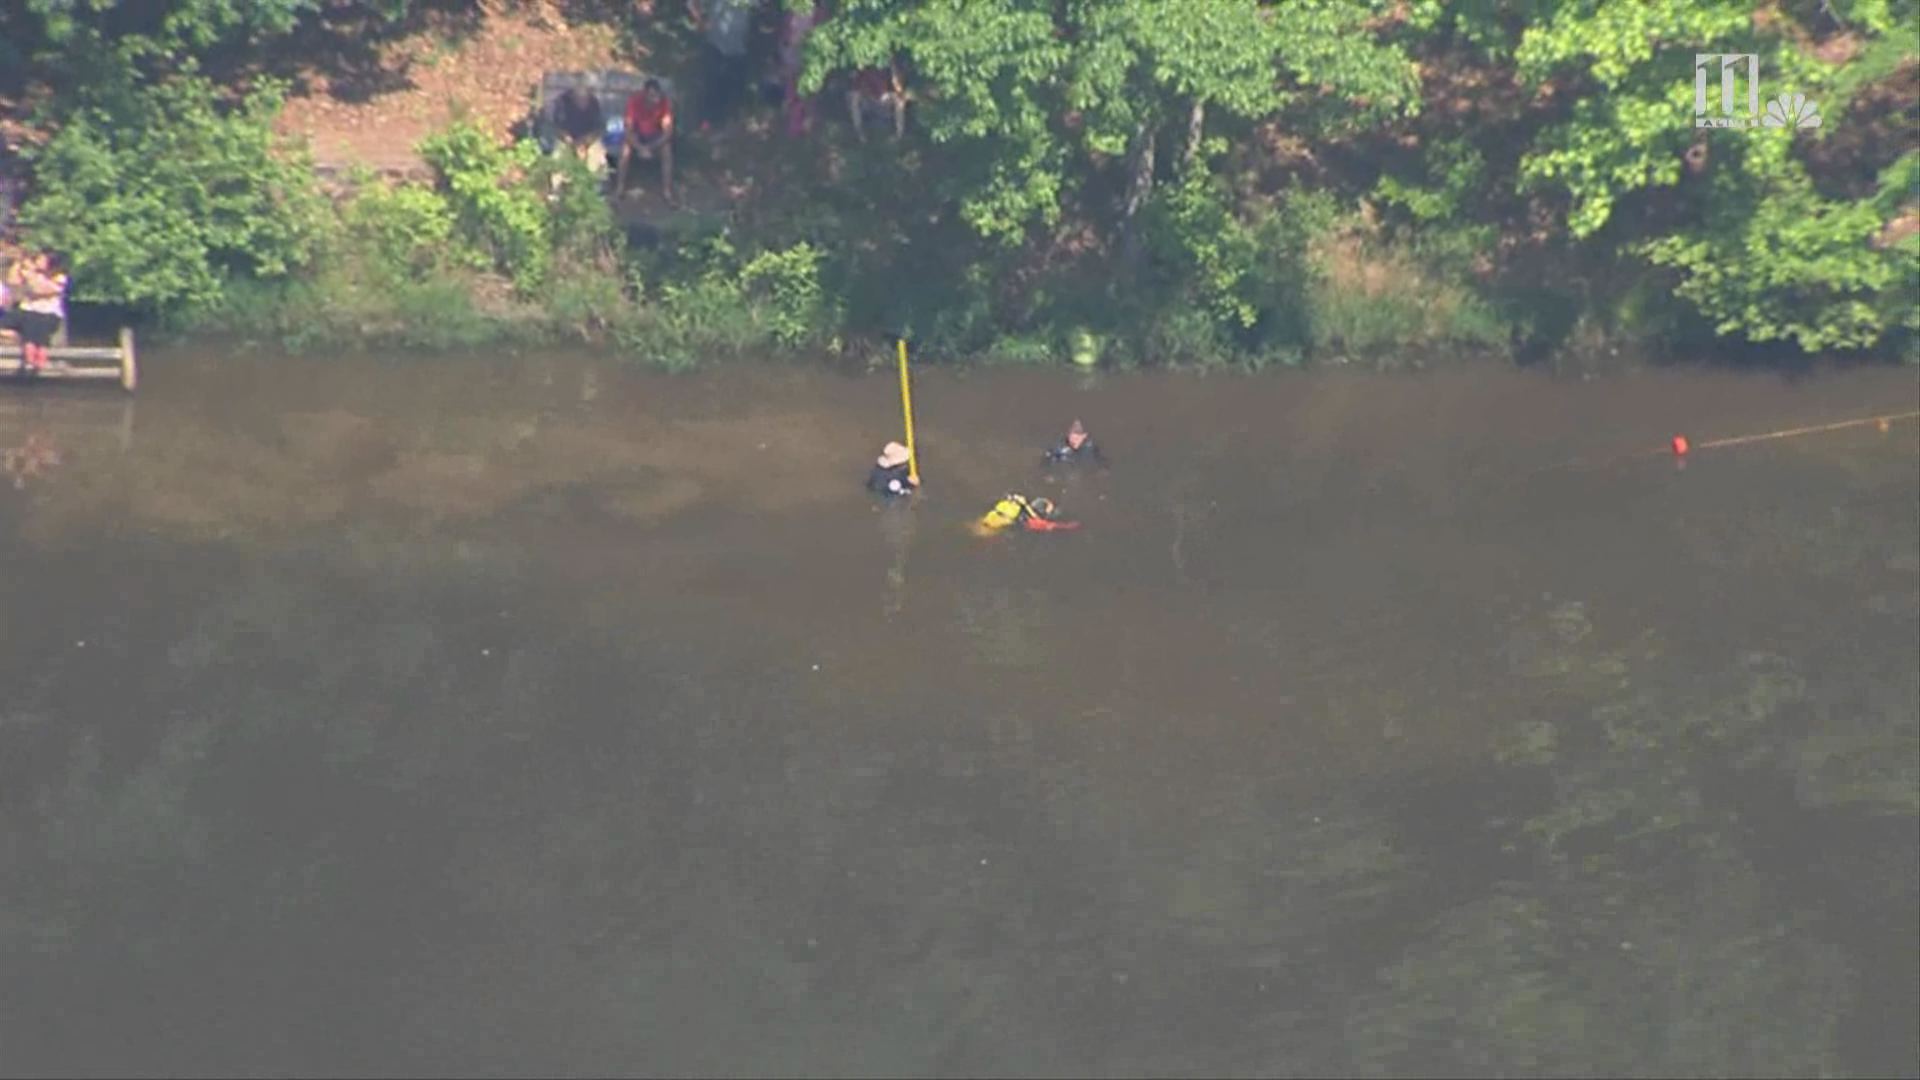 11alive.com | Crews recover body of boy who went missing in pond1920 x 1080